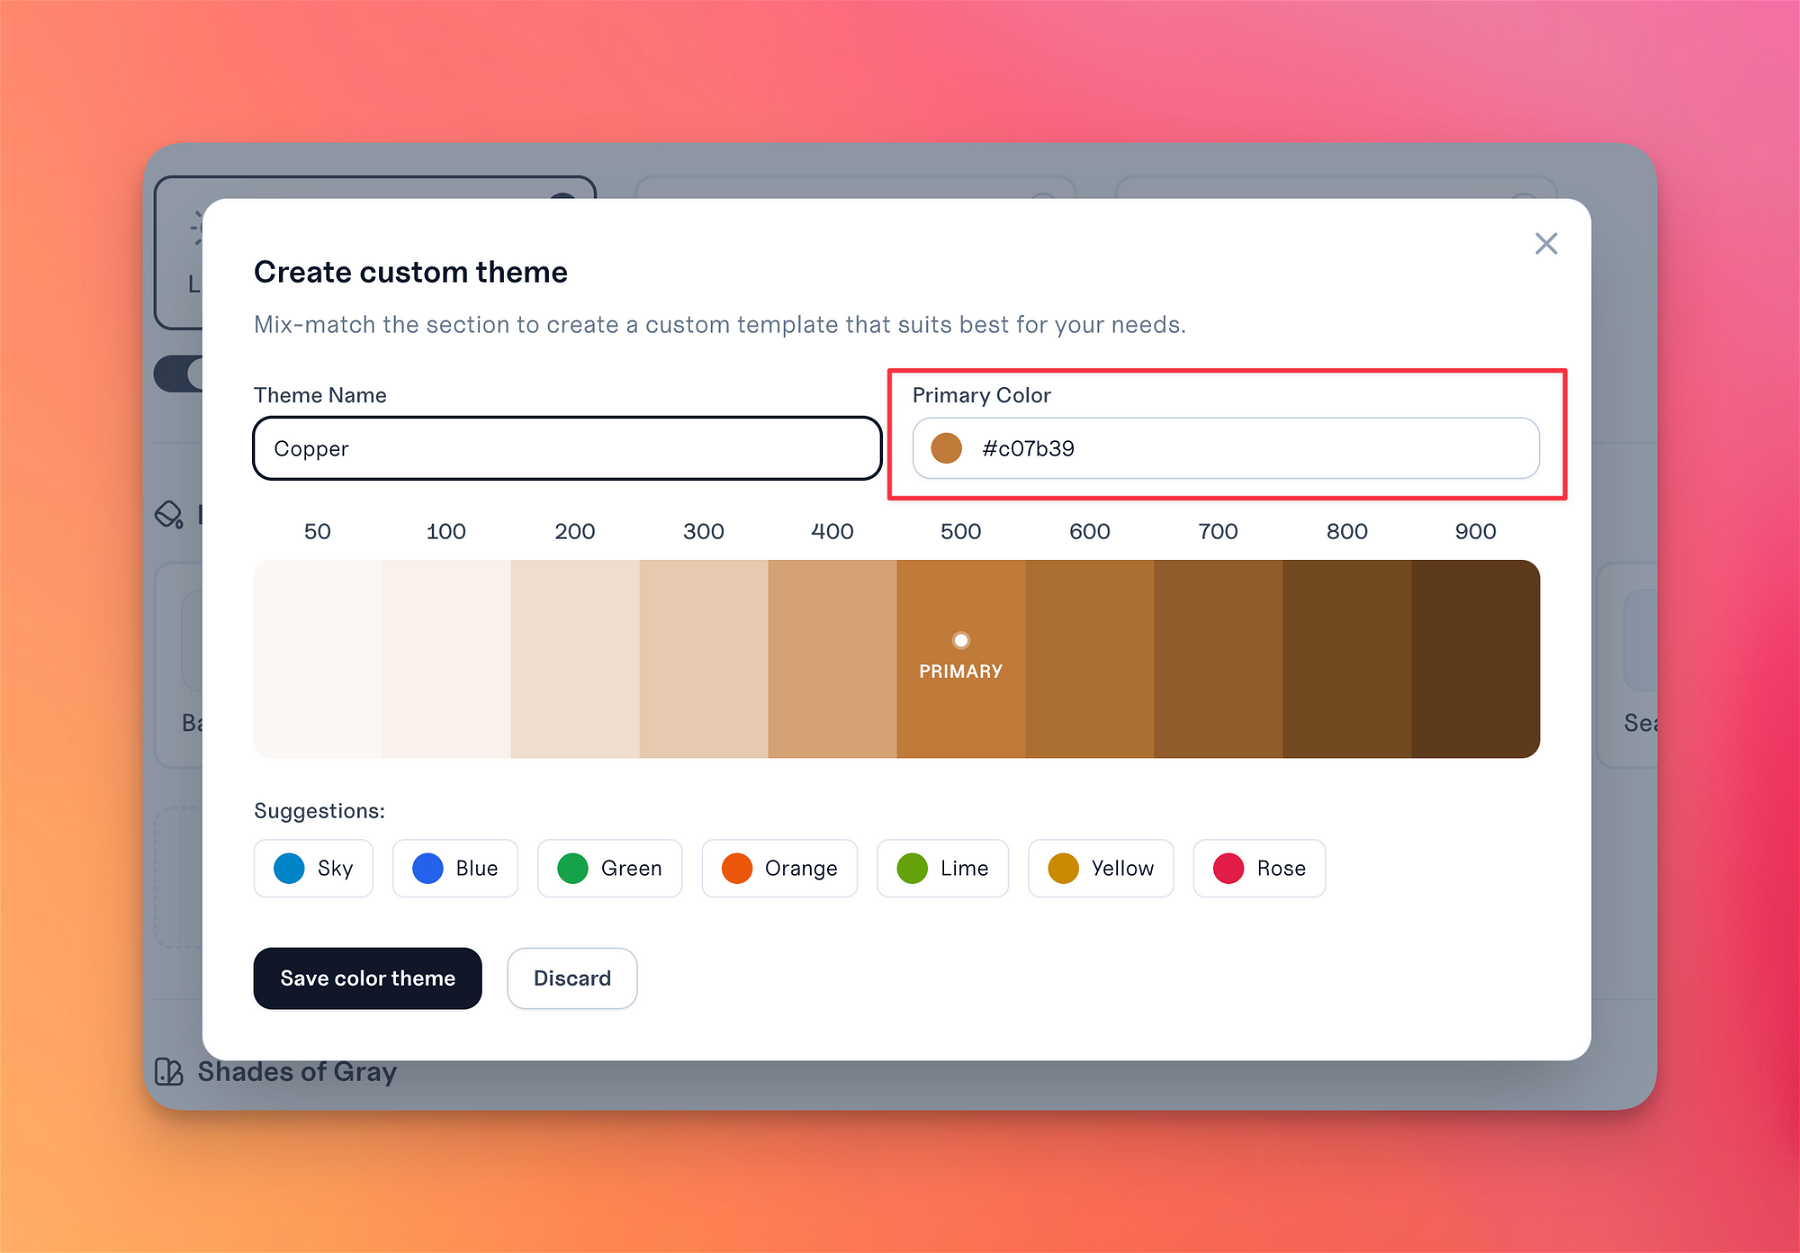 Create a new color theme with just a single brand color